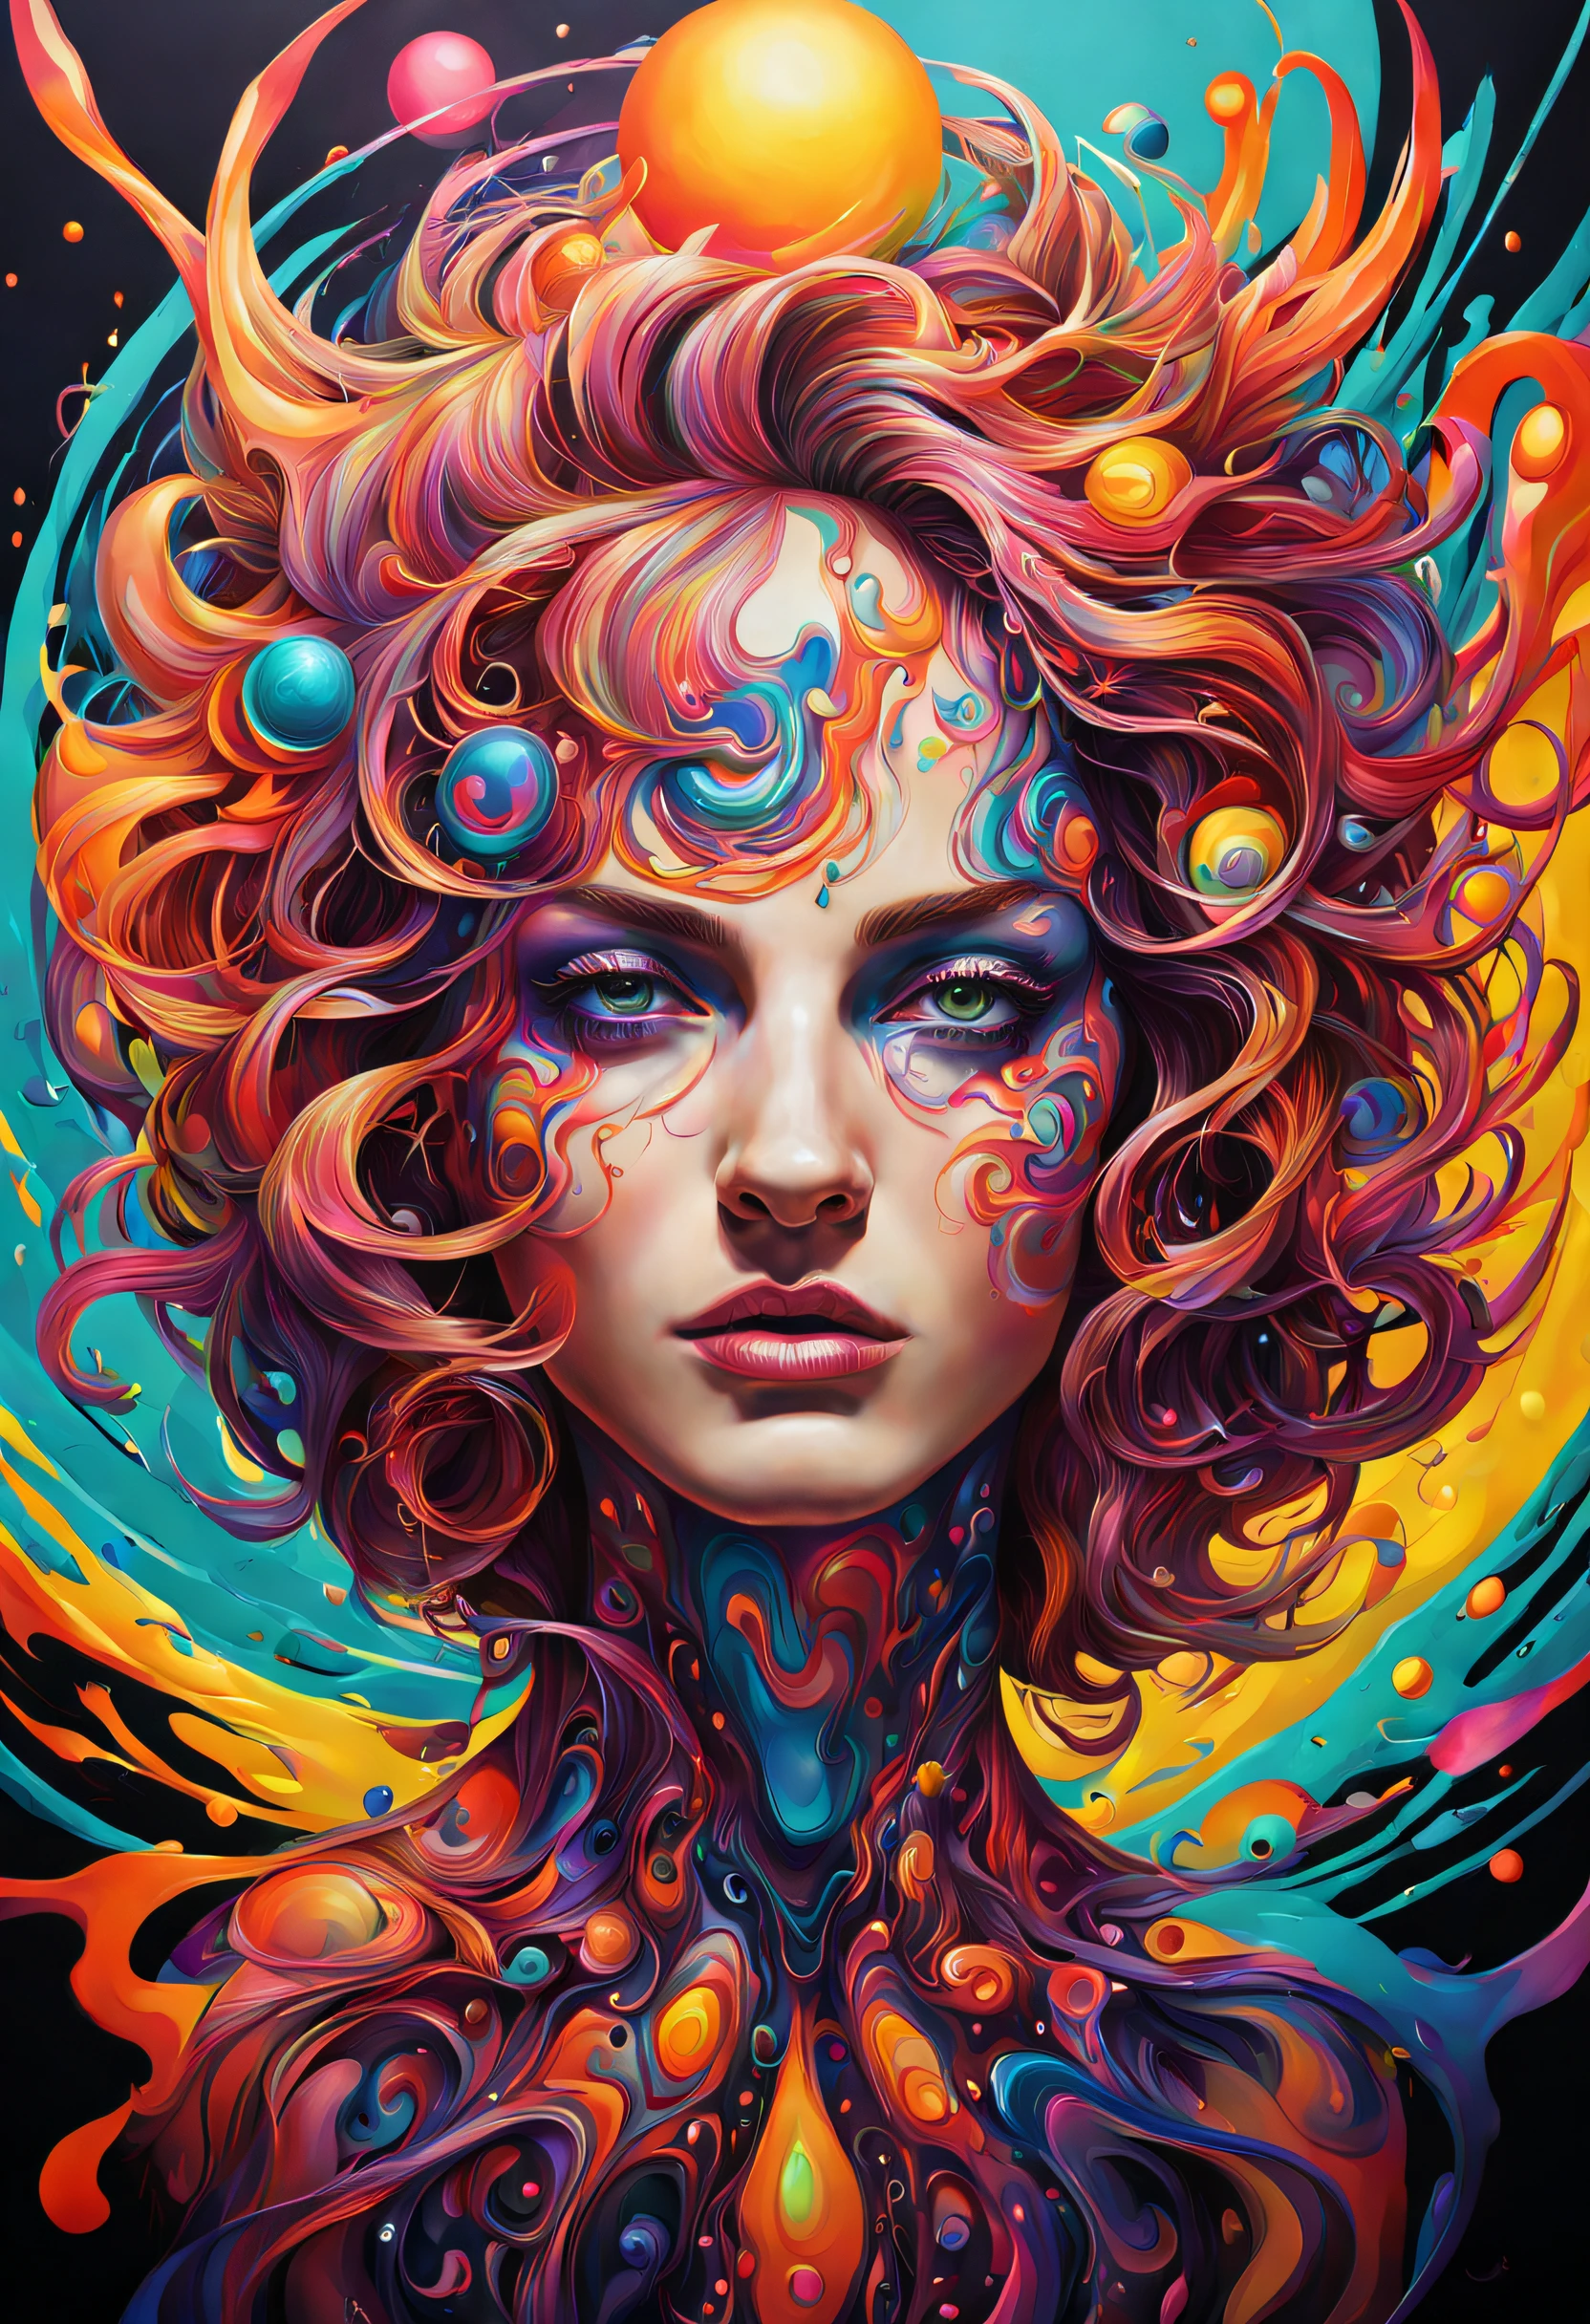 A realistic, psychedelic work full of flashy and brilliant color. It's textured and twisted